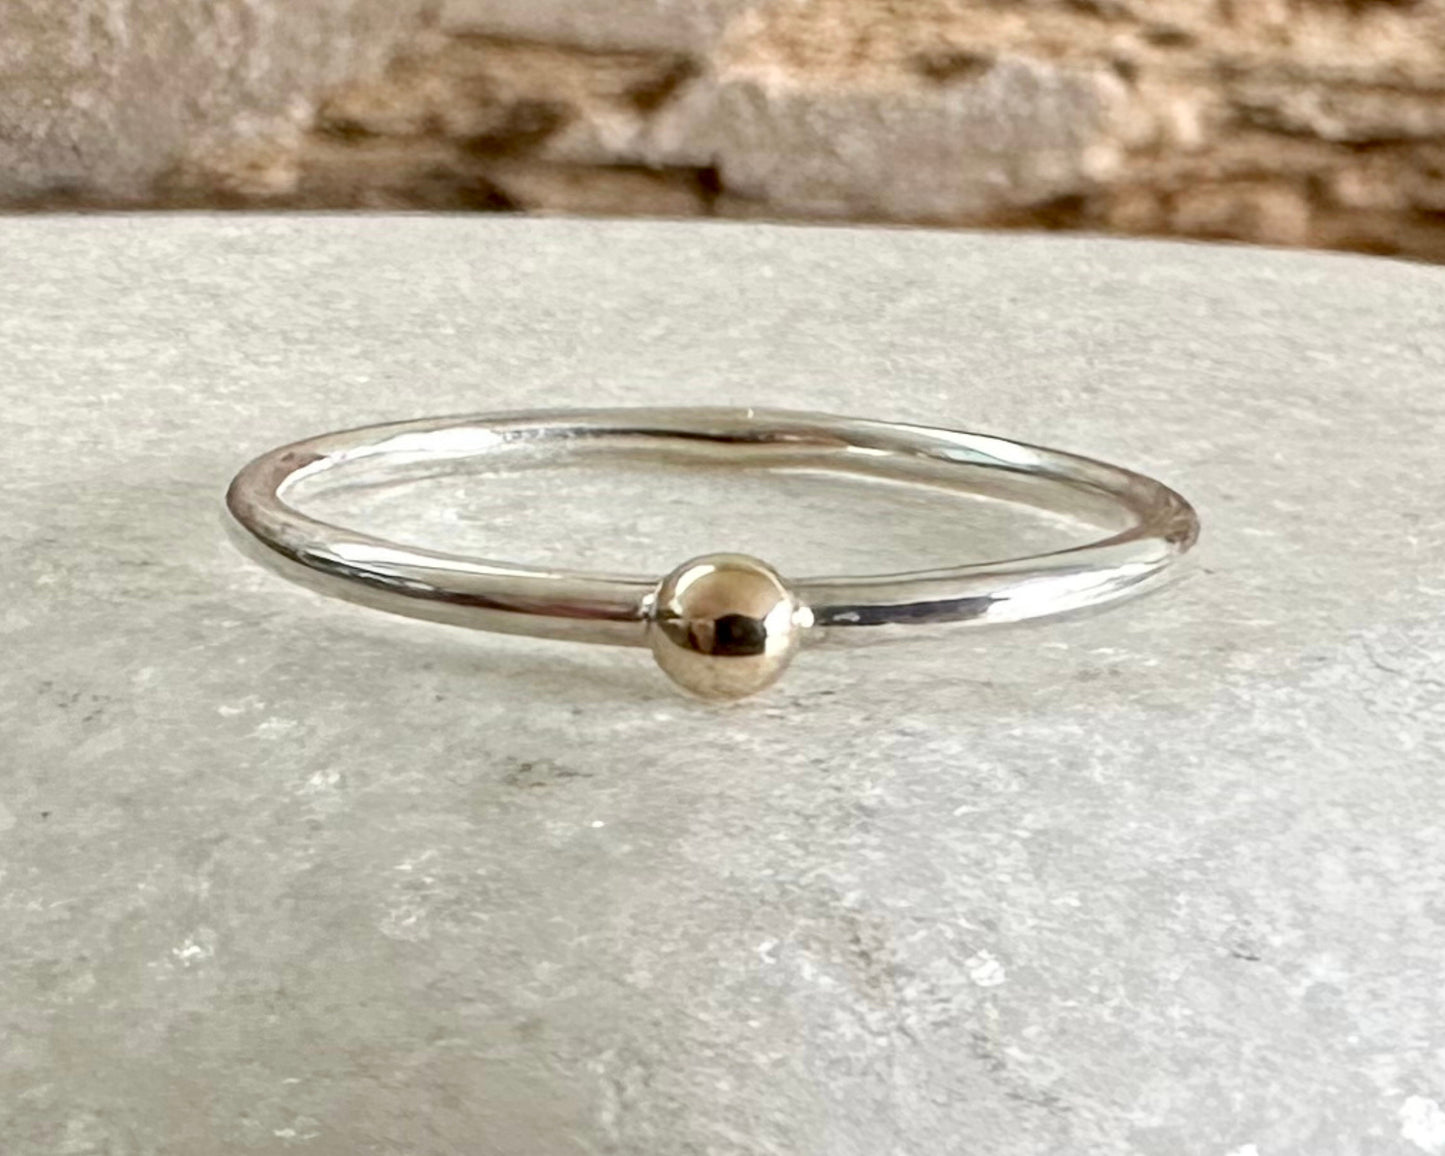 Solid Yellow Gold Dot on 1.3mm 925 Sterling Silver Ring Band, Pebble Ring, Mixed Metal Recycled Stacking Ring.